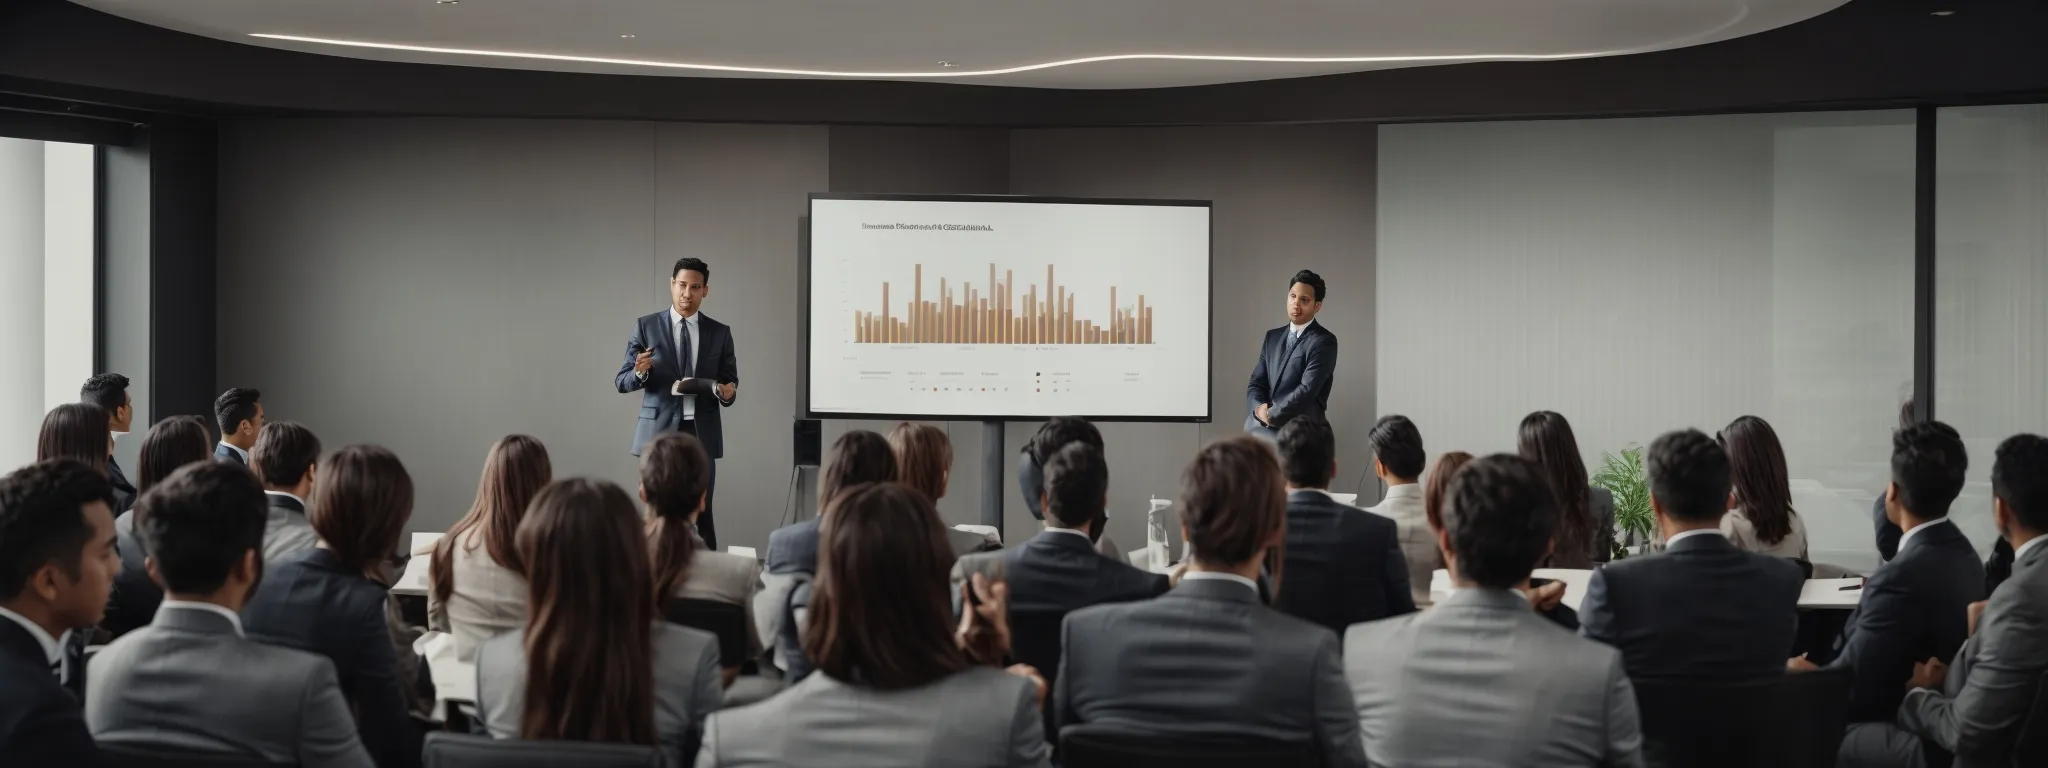 a confident professional presents a graph showing significant growth to an attentive audience in a modern conference room.